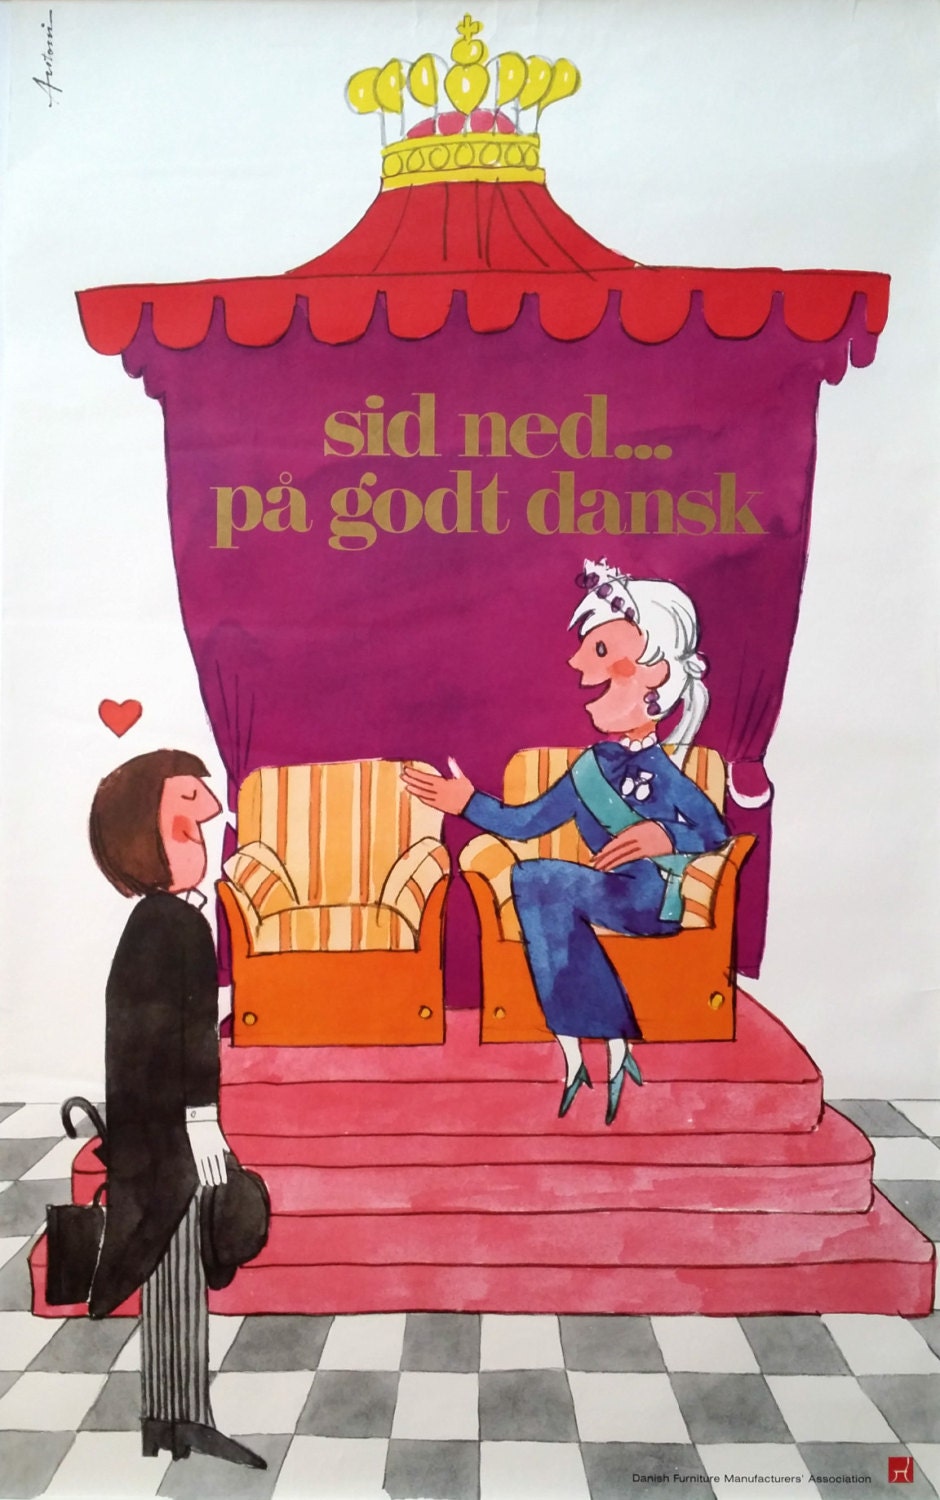 1970s Danish Furniture Quality Control by Antoni (Queen) - Original Vintage Poster